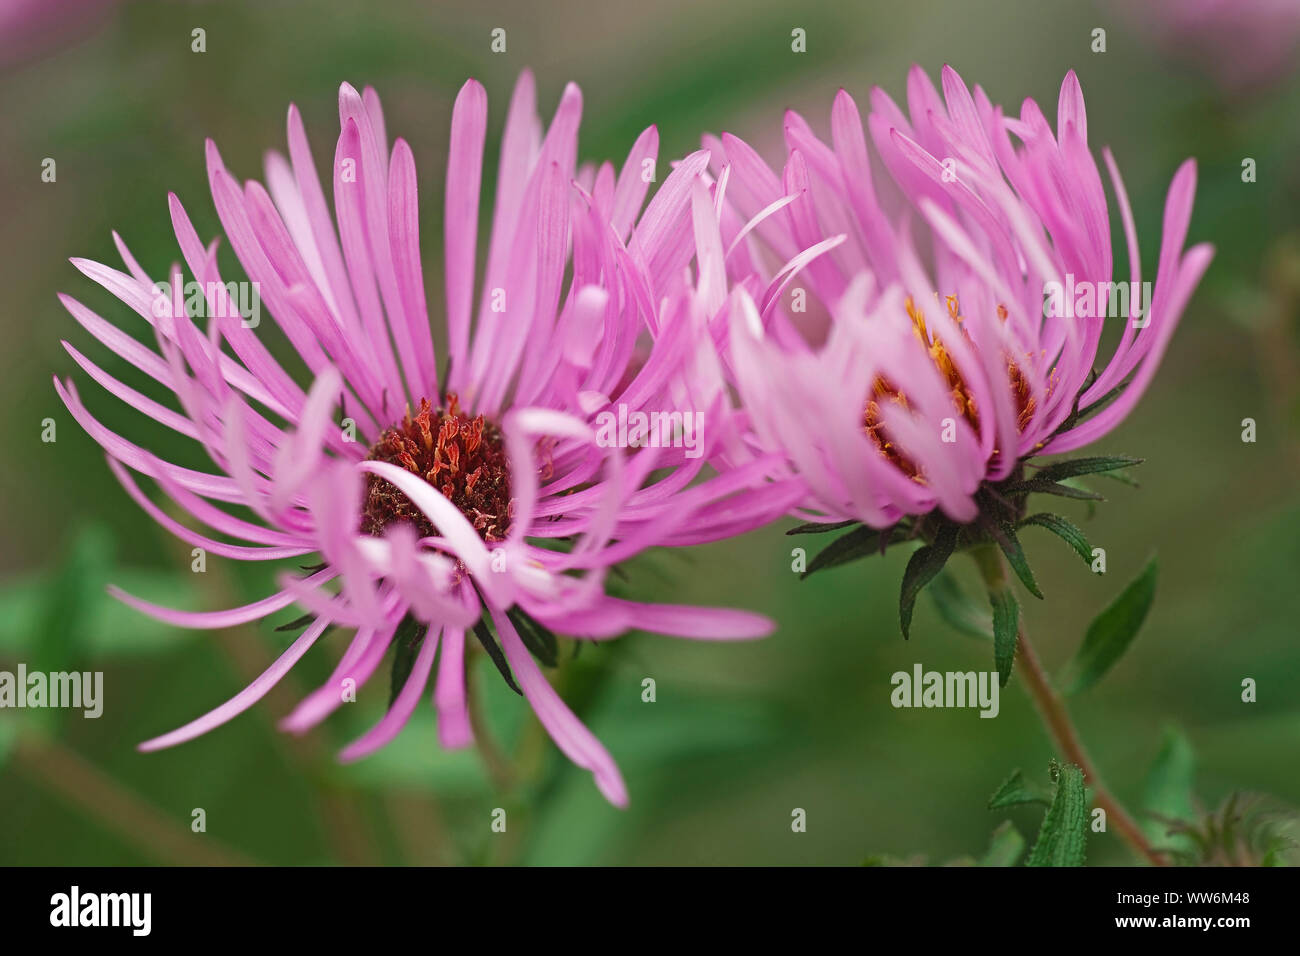 Aster, New England aster, Symphyotrichum novae-angliae, Tw pink coloured flowers growing outdoor. Stock Photo